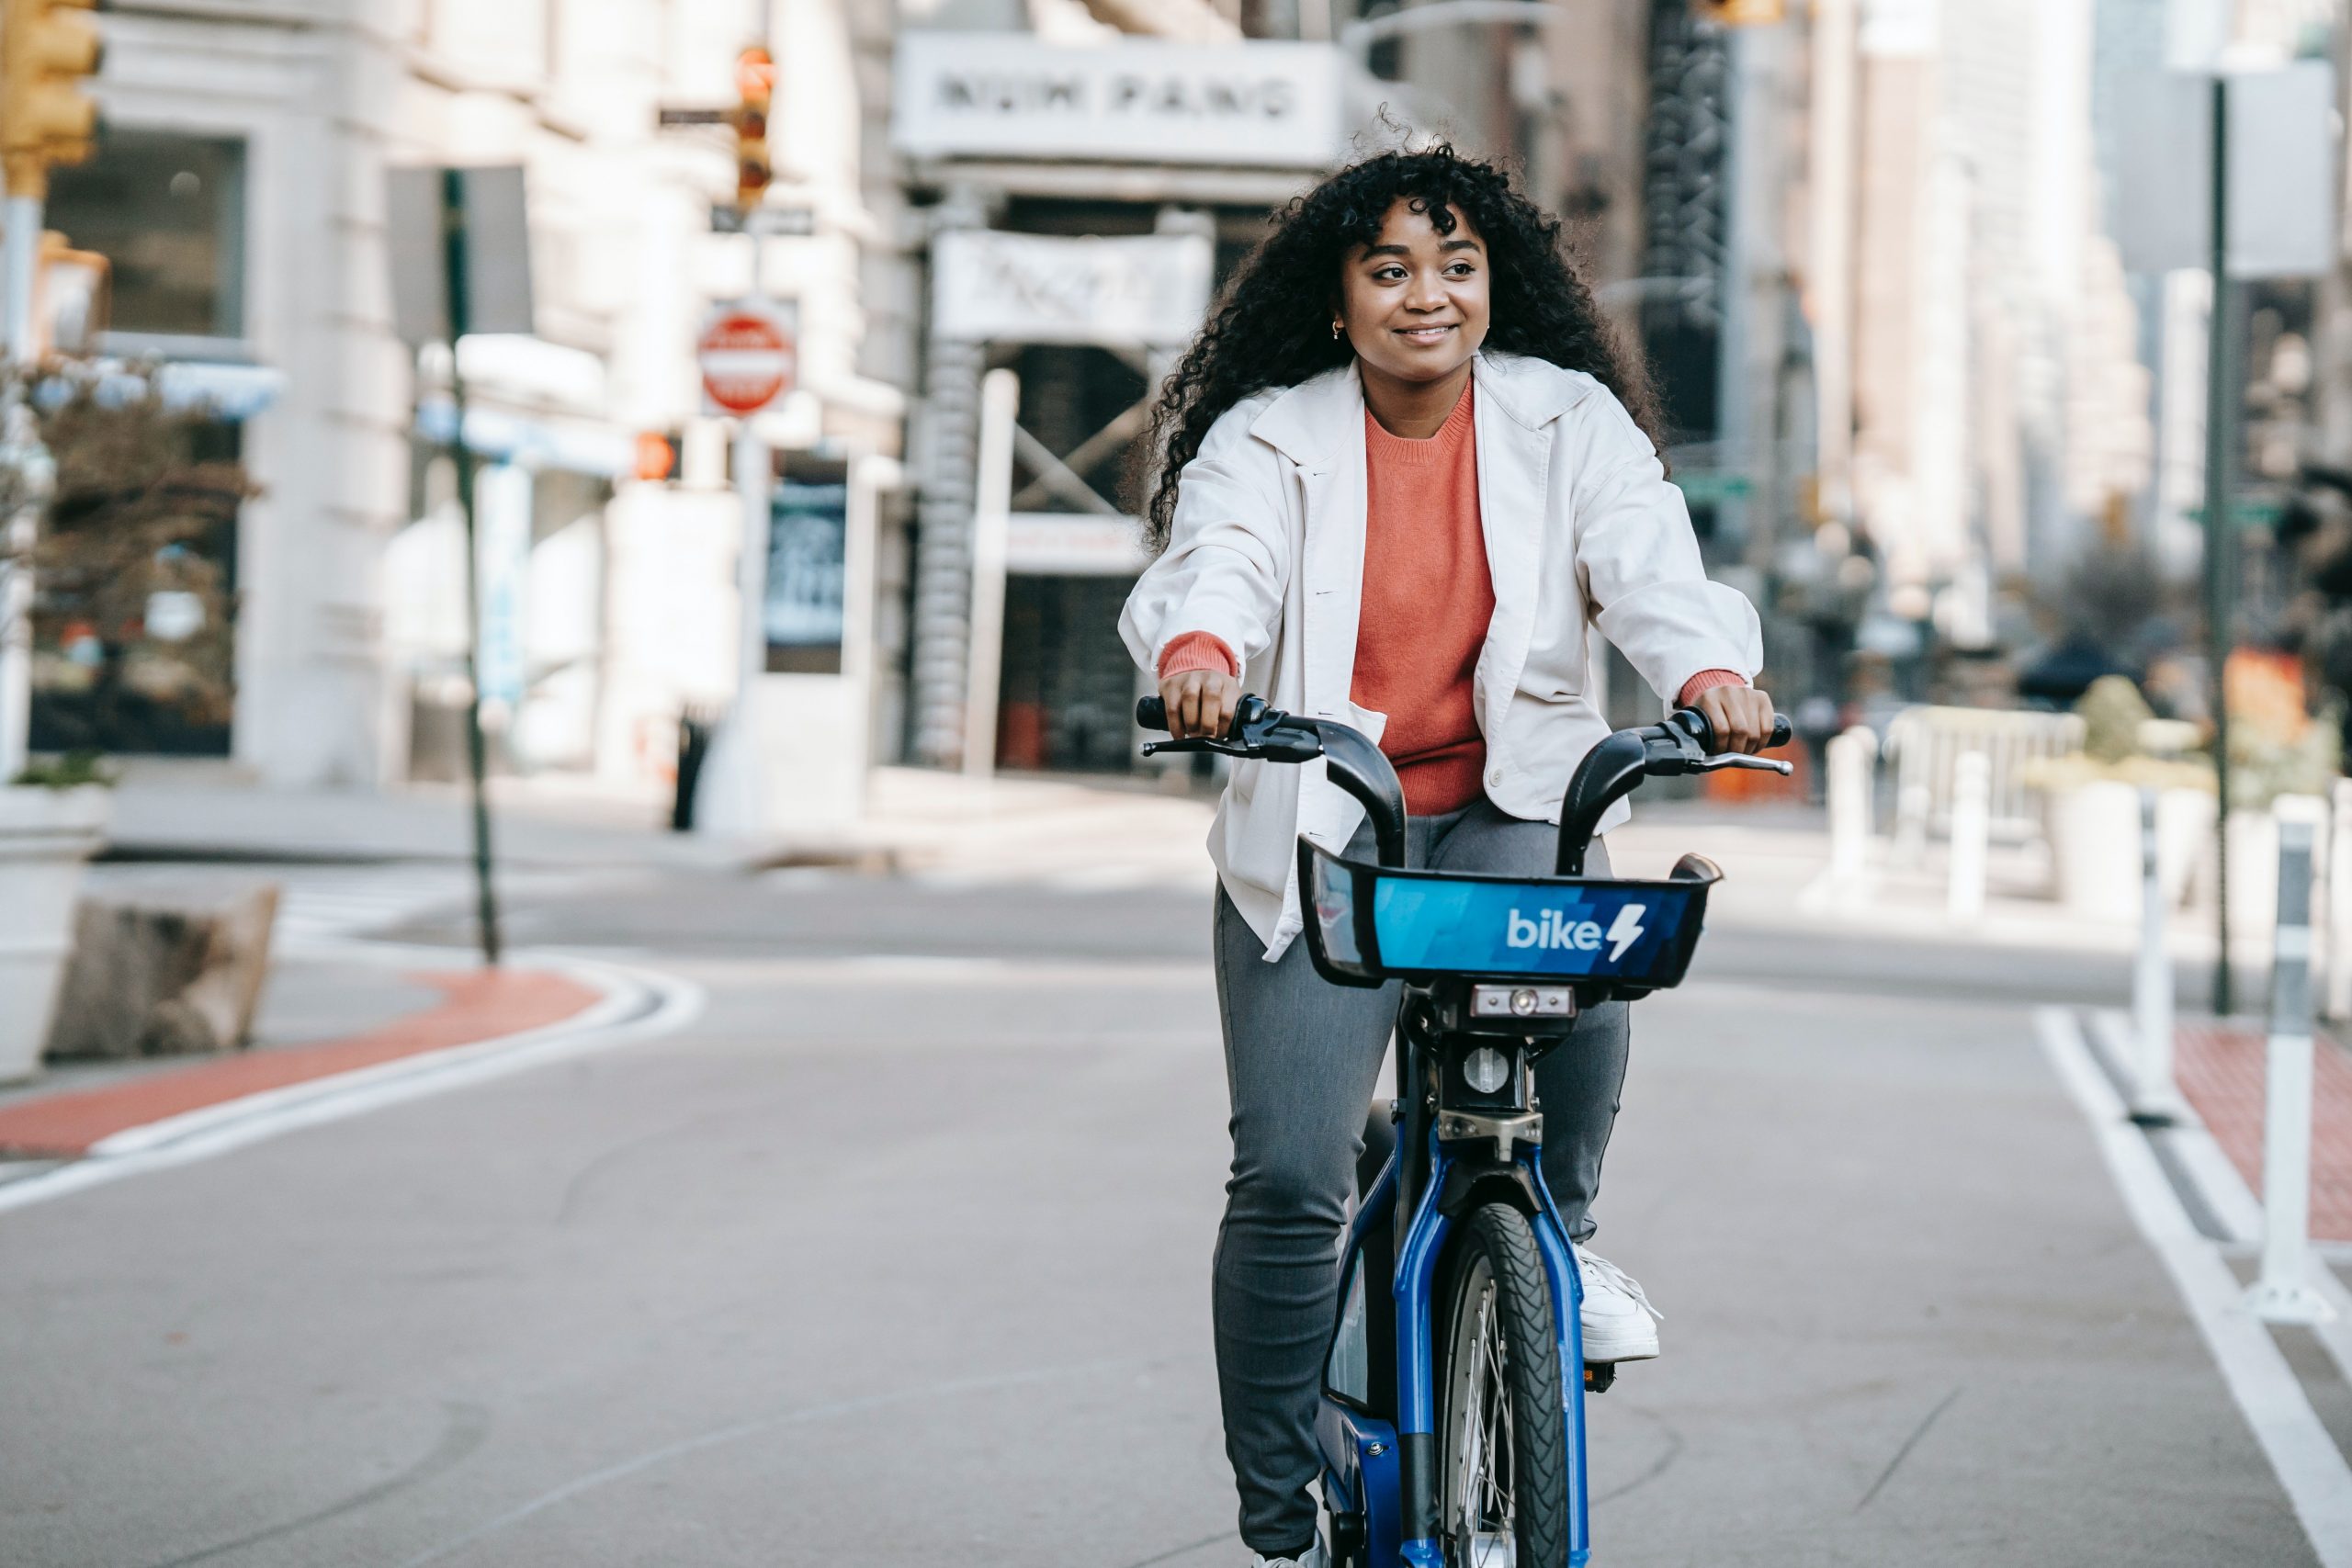 The Market Cycles II Report Shows an Increase in active commuting. Image from Pexels.